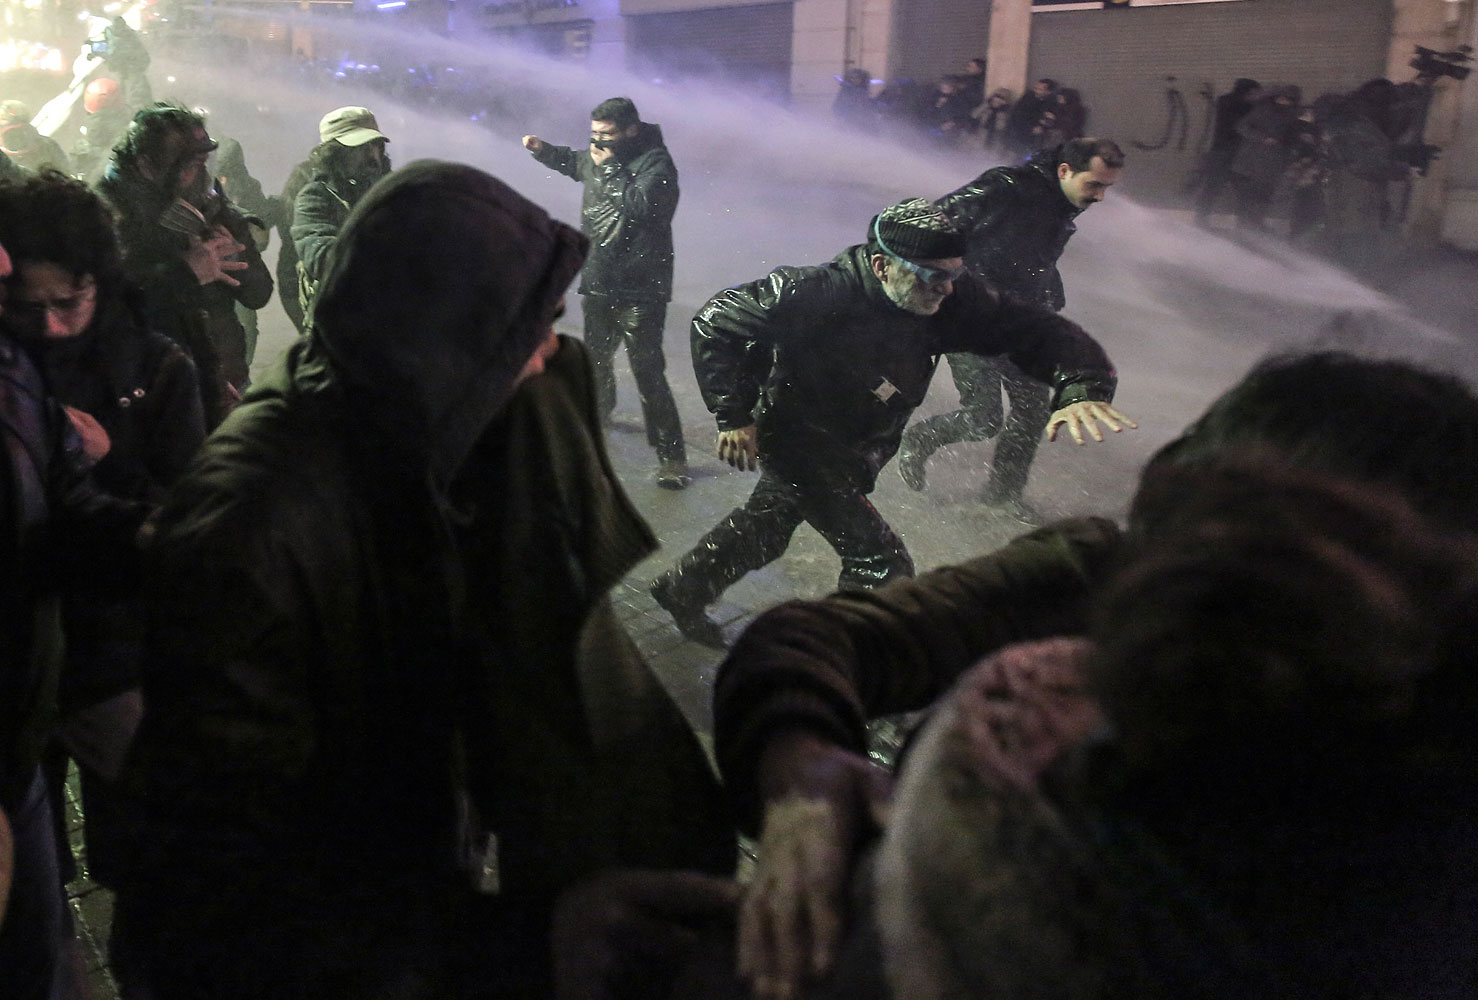 Riot police use water cannons to disperse people who protest the death of Berkin Elvan, a Turkish teenager who was in a coma since being hit in the head by a tear gas canister fired by police during the summer's anti-government protests, in Istanbul, March 11, 2014.